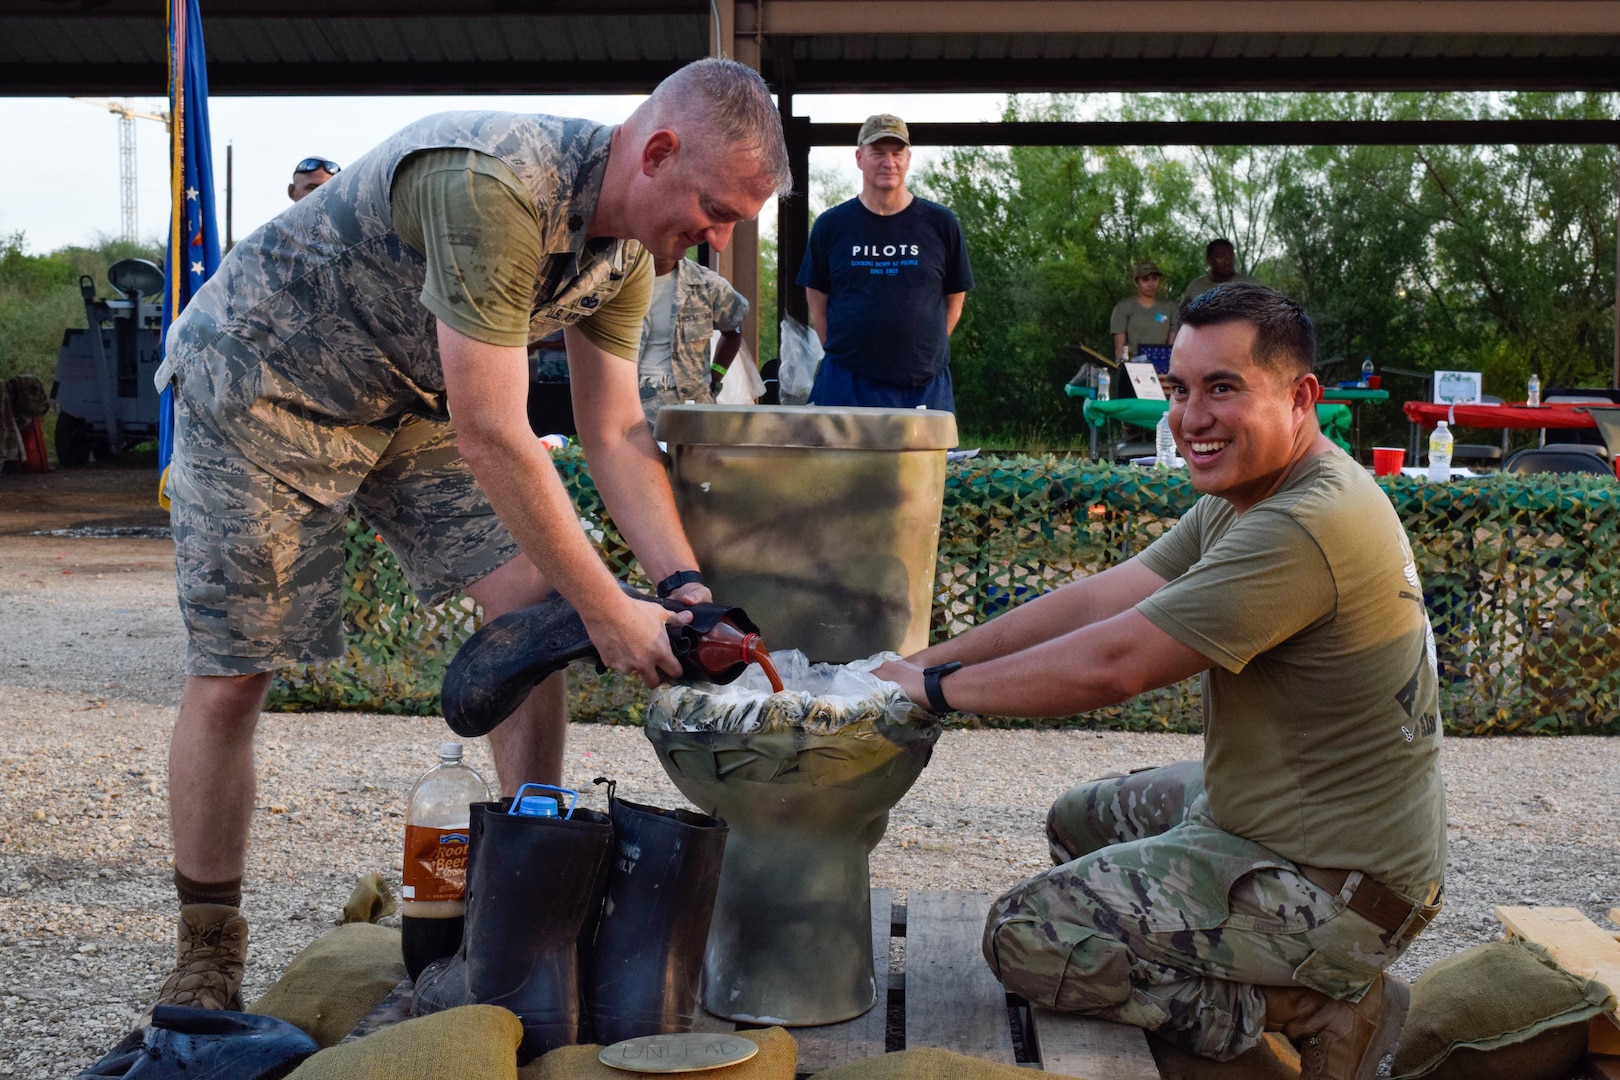 Maj. Mark Howard, 433rd Security Forces Squadron commander, and Tech. Sgt. Steven Redgate, 433rd SFS defender, prepare the grog bowl during a combat dining-in event at Joint Base San Antonio-Chapman Training Annex, Texas, Sept. 10, 2022. The grog bowl is a U.S. Air Force tradition which contains a mixture of various beverages. (U.S. Air Force photo by Senior Airman Brittany Wich)